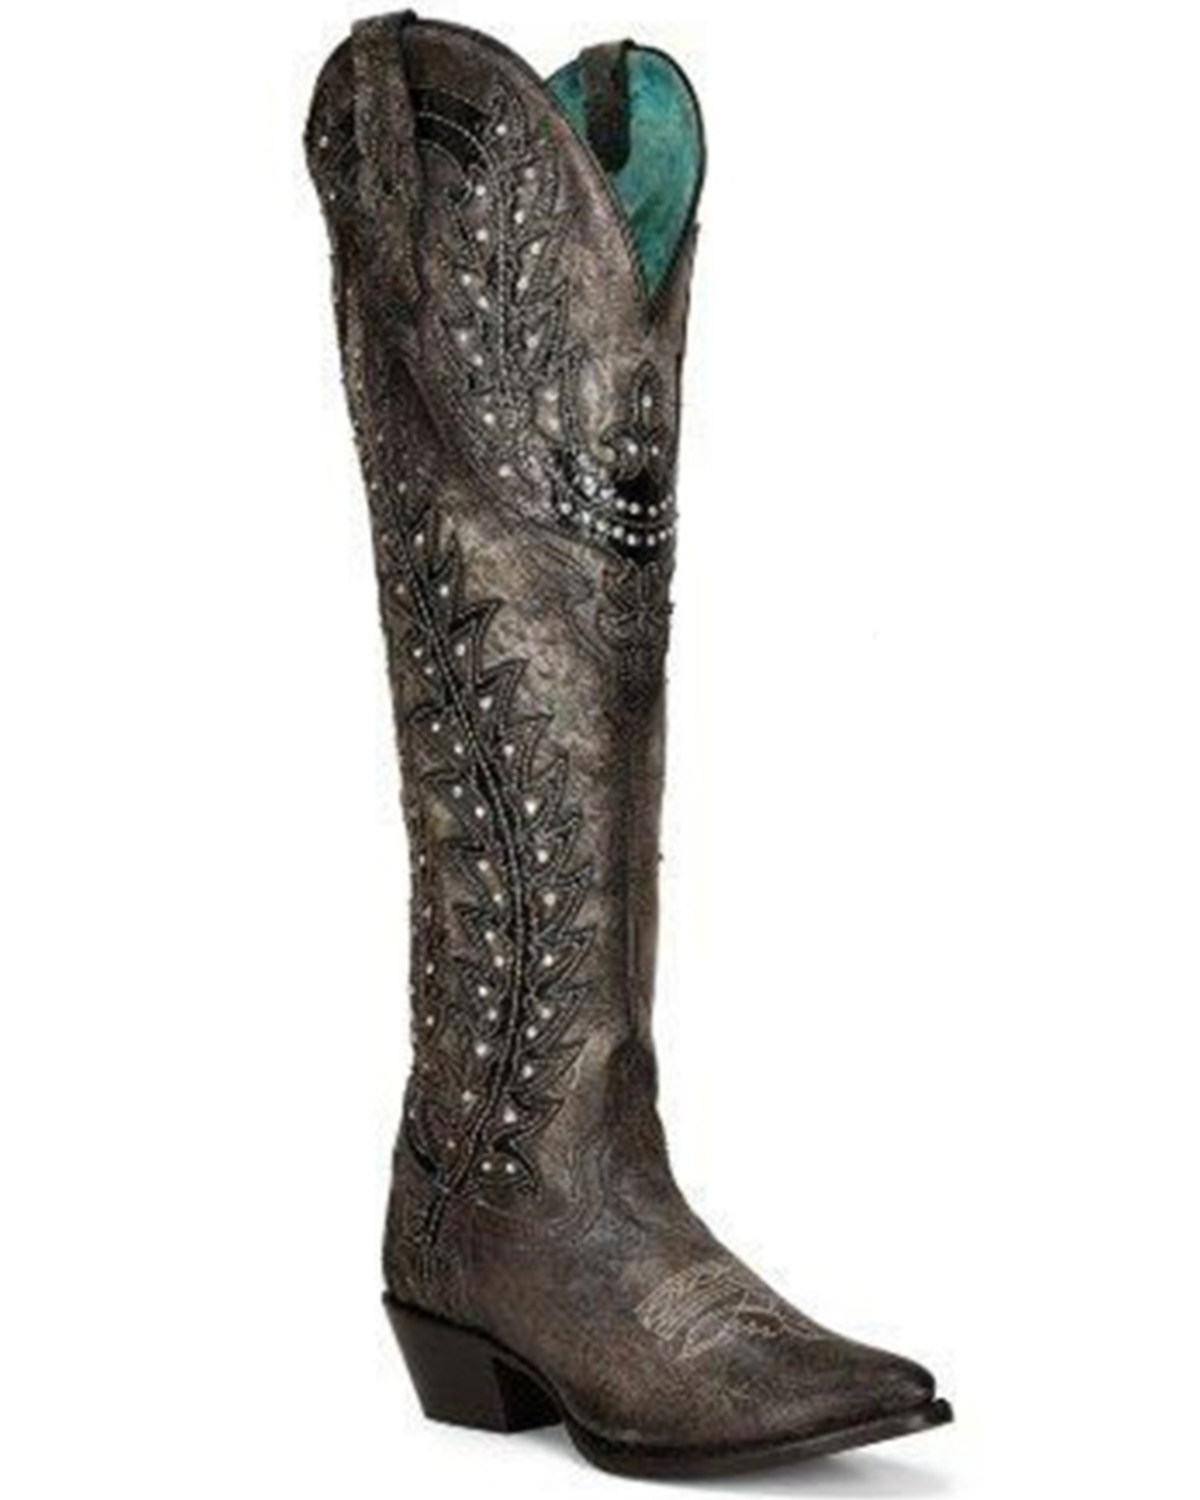 Corral Women's Crystal Western Boots - Pointed Toe